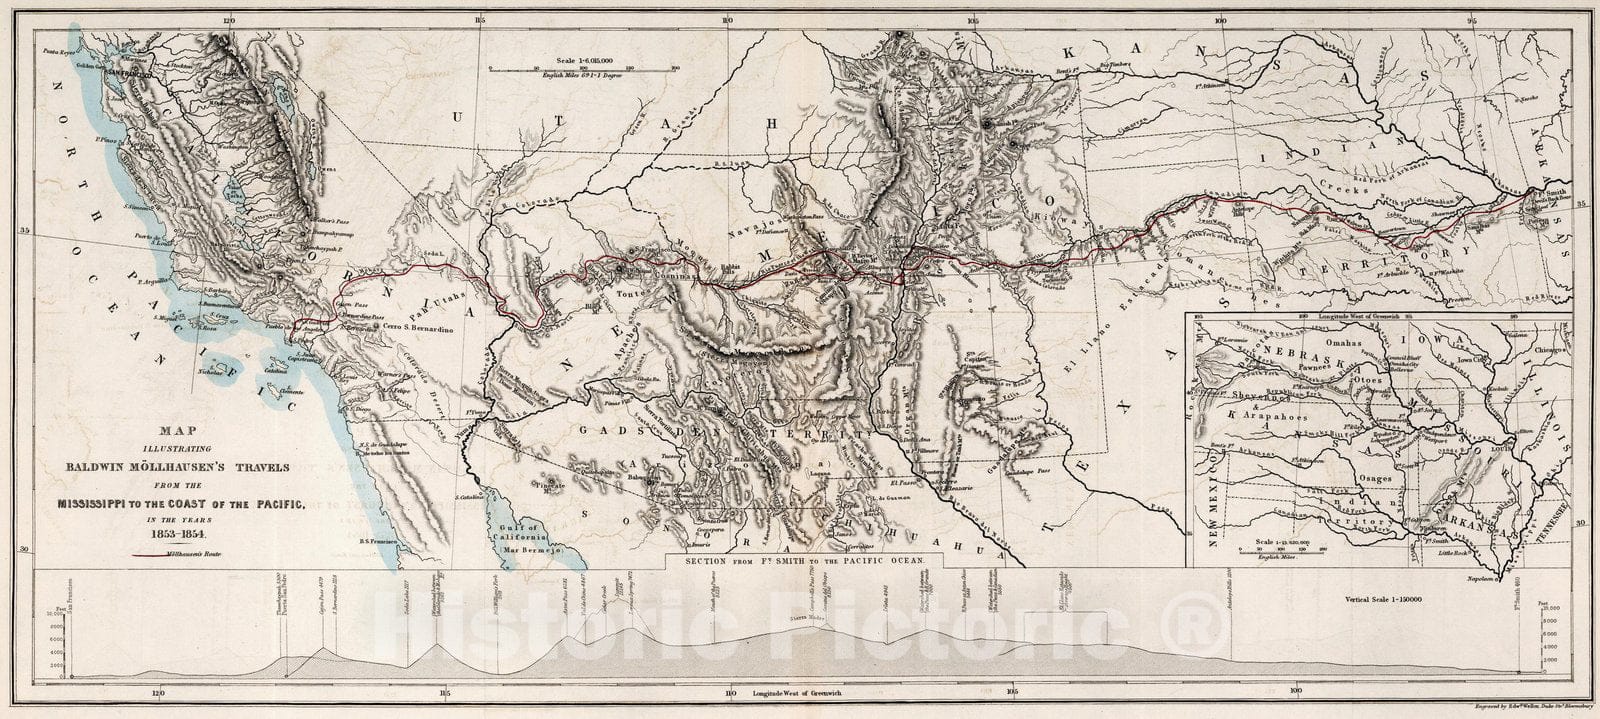 Historic Map : Map illustrating Baldwin Mollhausen's travel from Mississippi to the Coast of the Pacific. V. 1, 1858 - Vintage Wall Art